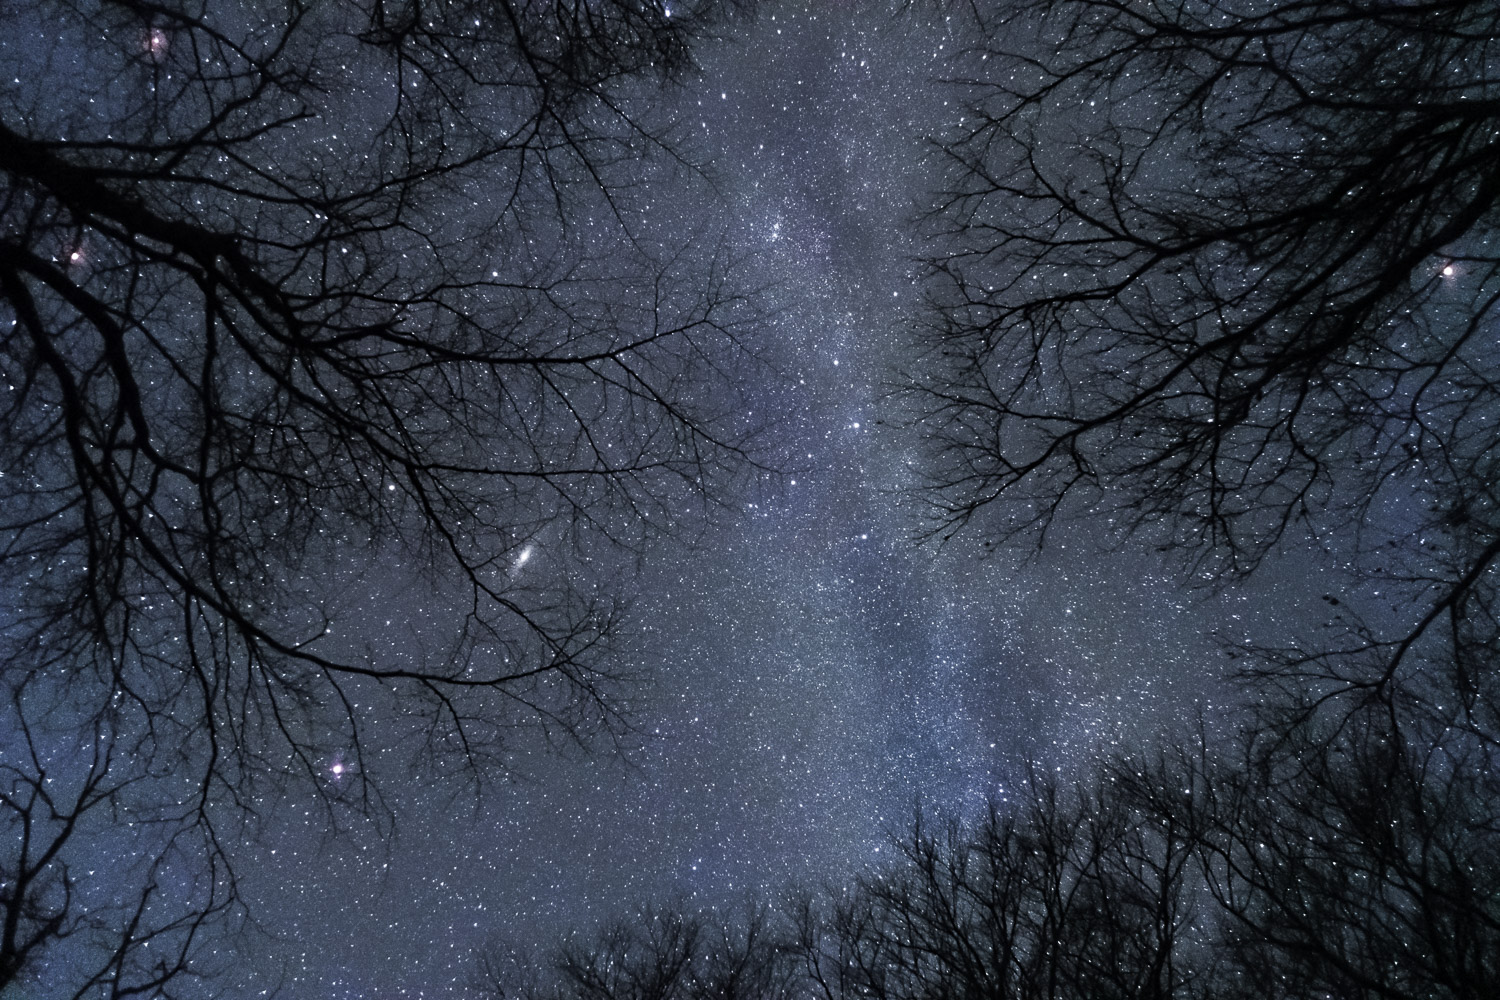 You can buy this  astronomy poster of the Milky way seen through the tree crowns in Dark Sky Moen as a Hahnemühle giclee printed fine art poster in A1 or A2 format.